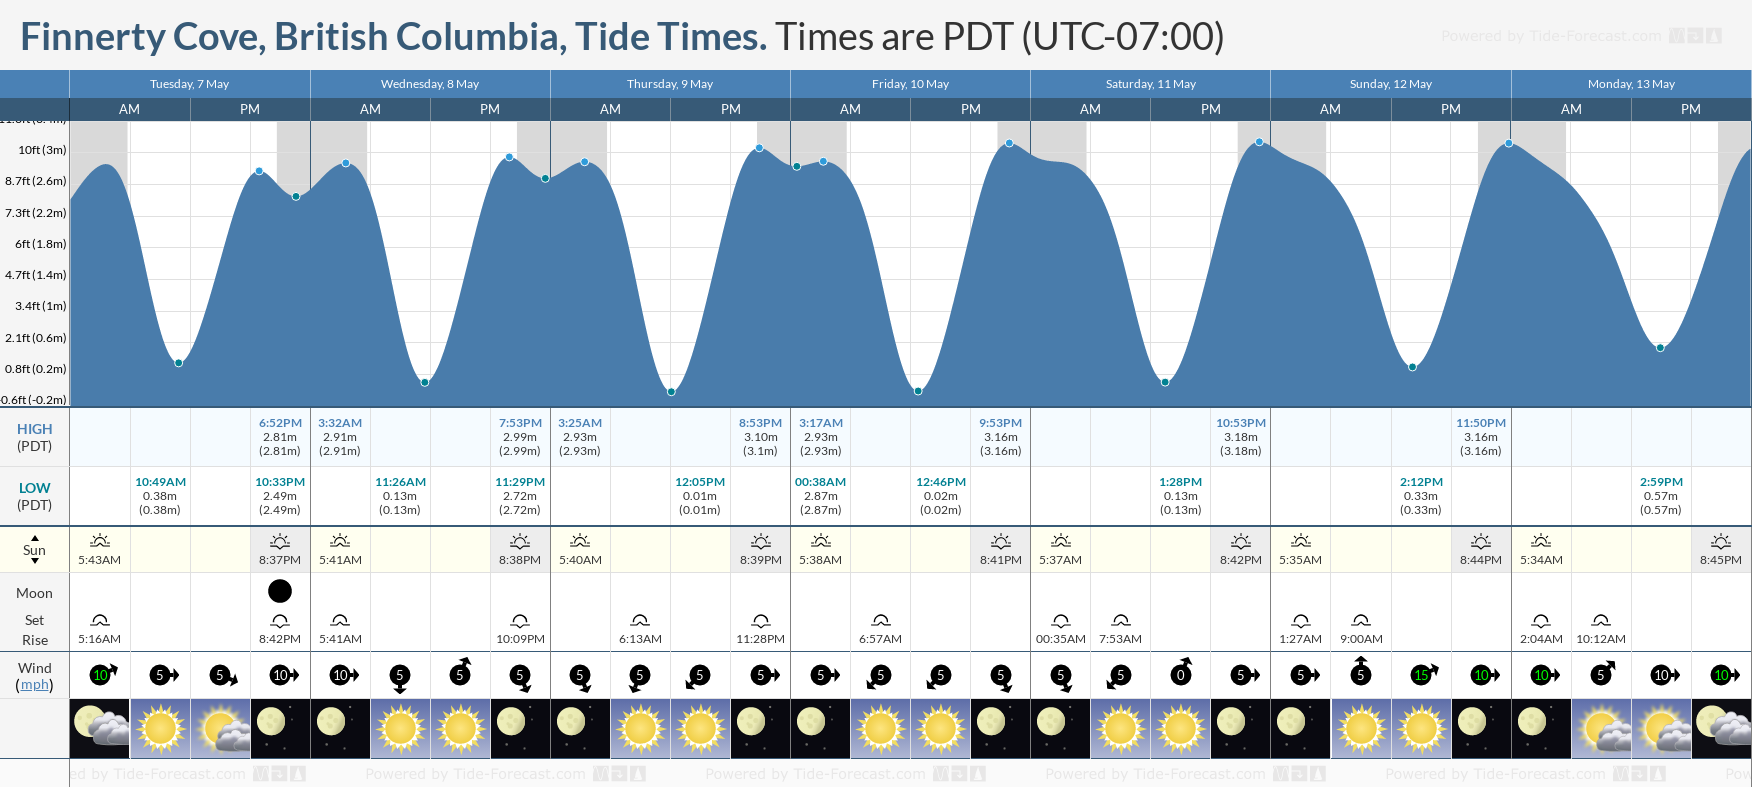 Finnerty Cove, British Columbia Tide Chart including high and low tide tide times for the next 7 days